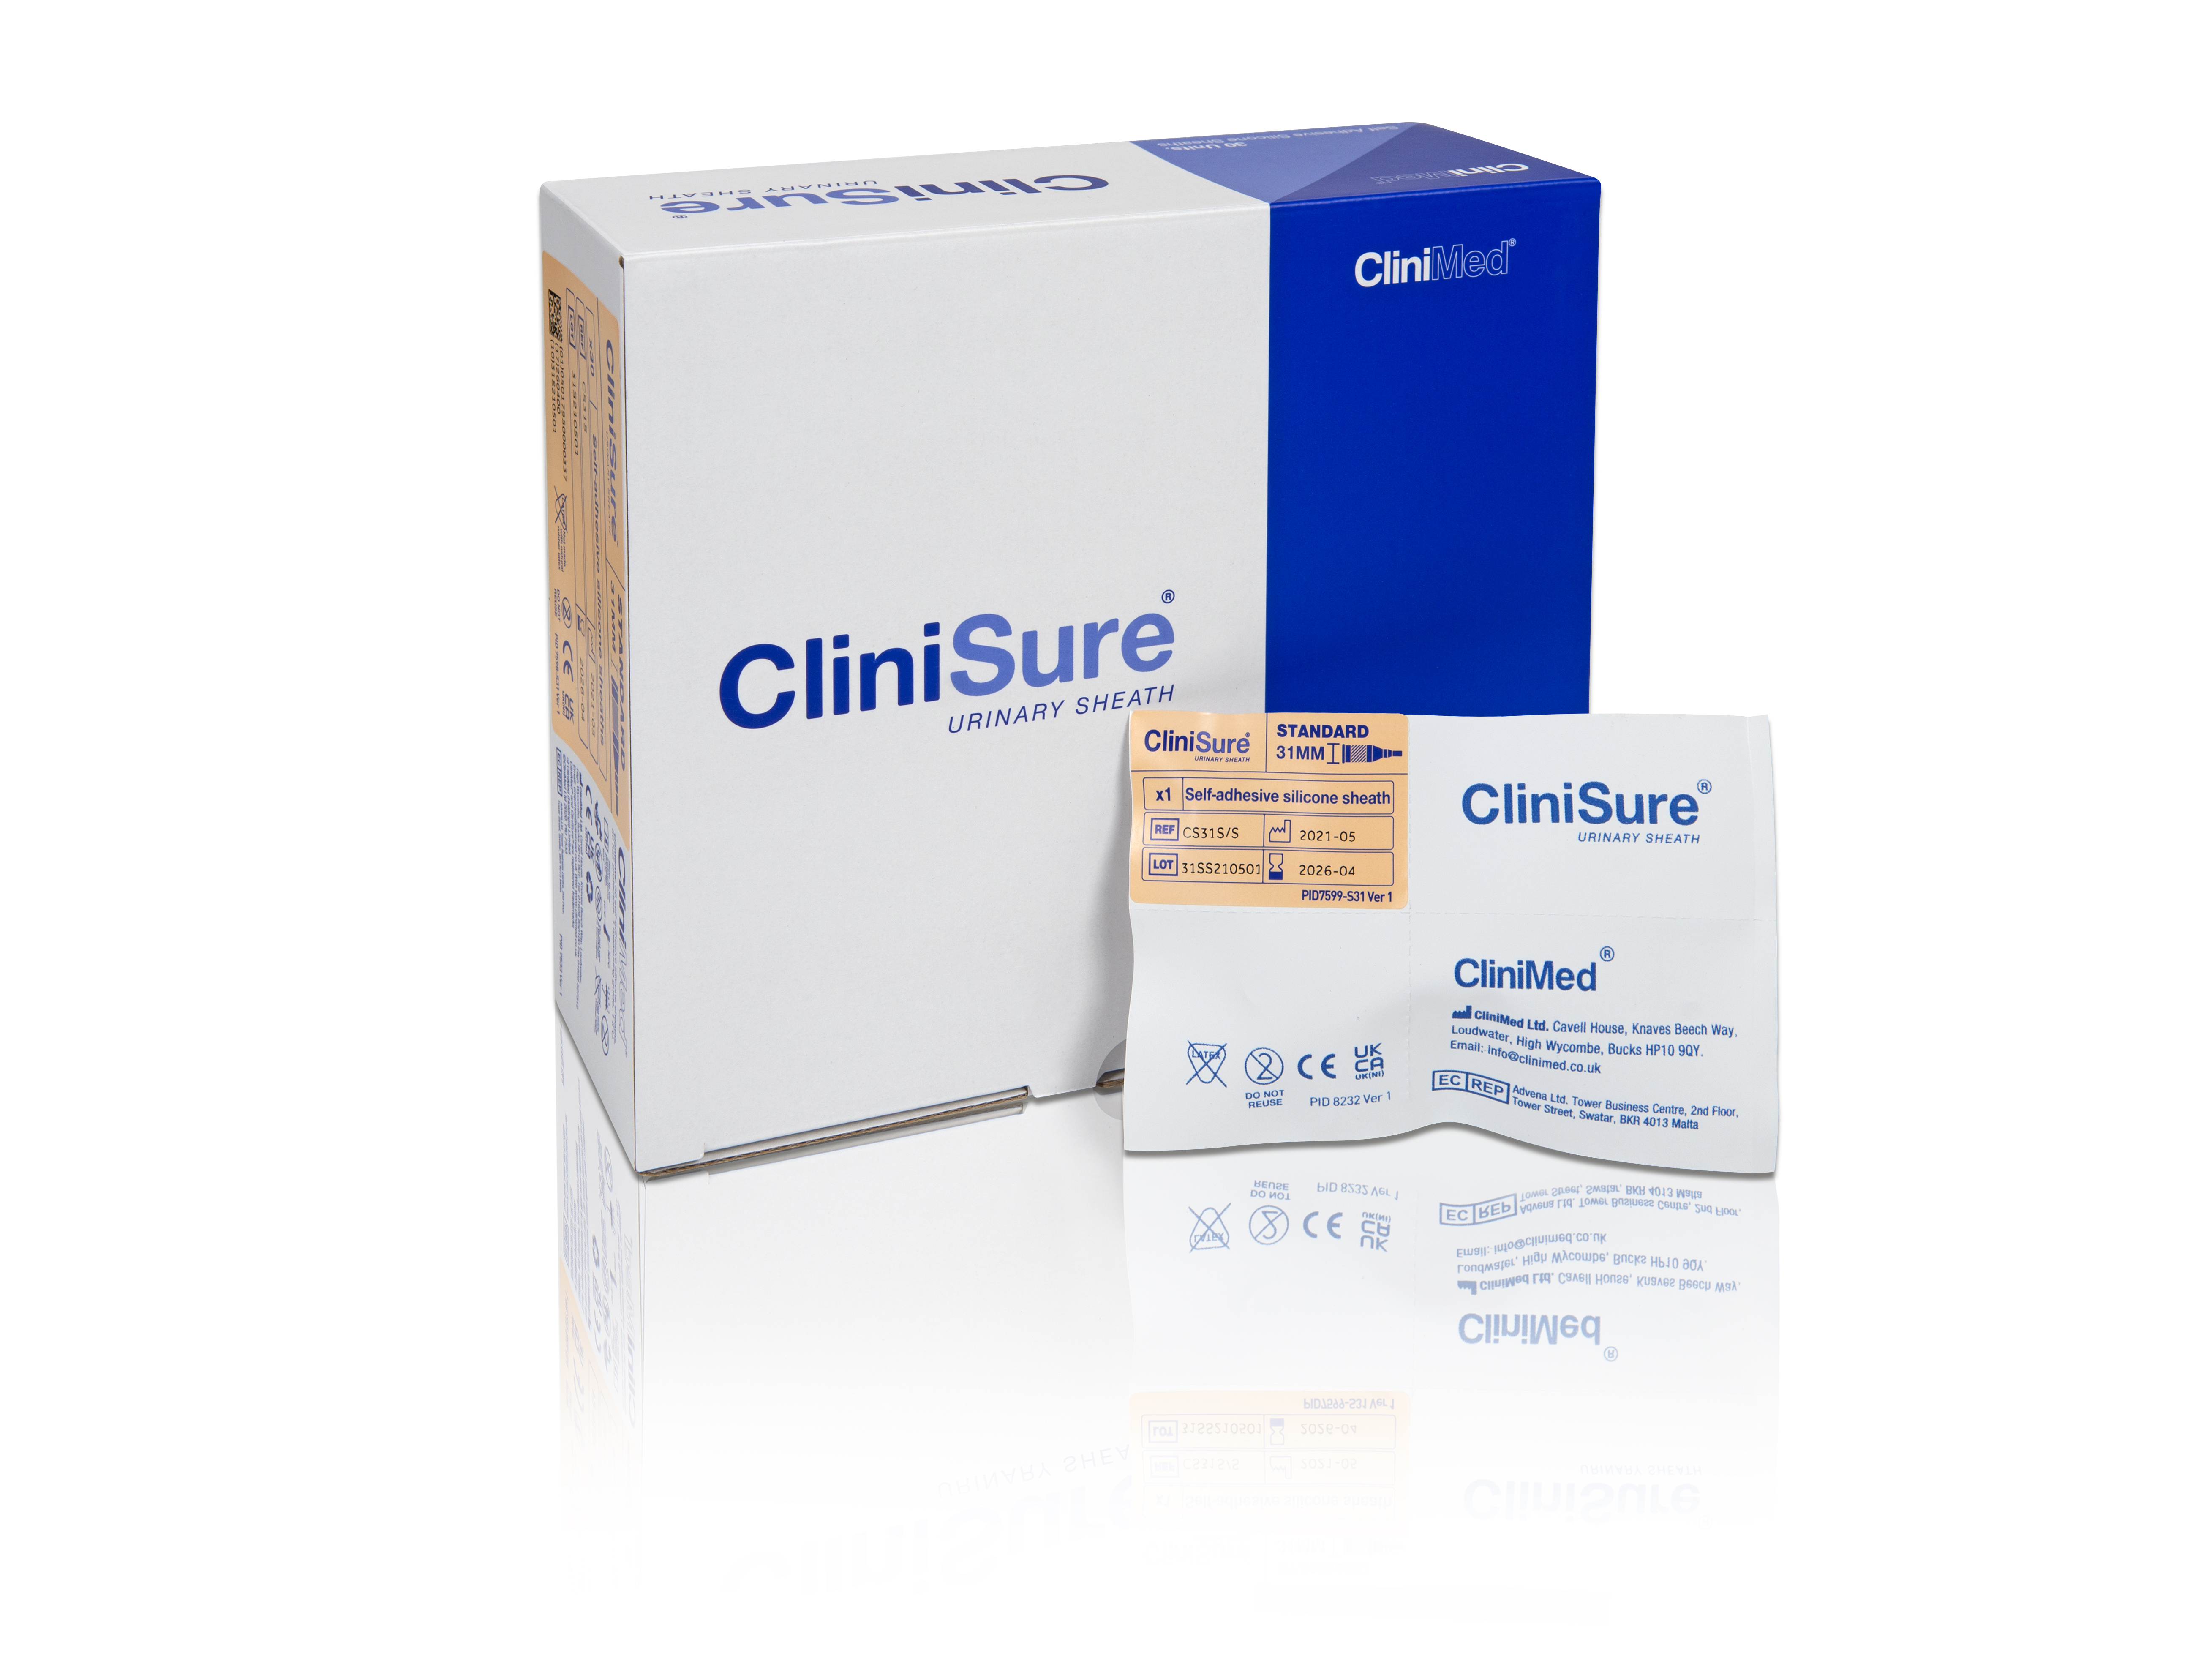 clinisure box and outer